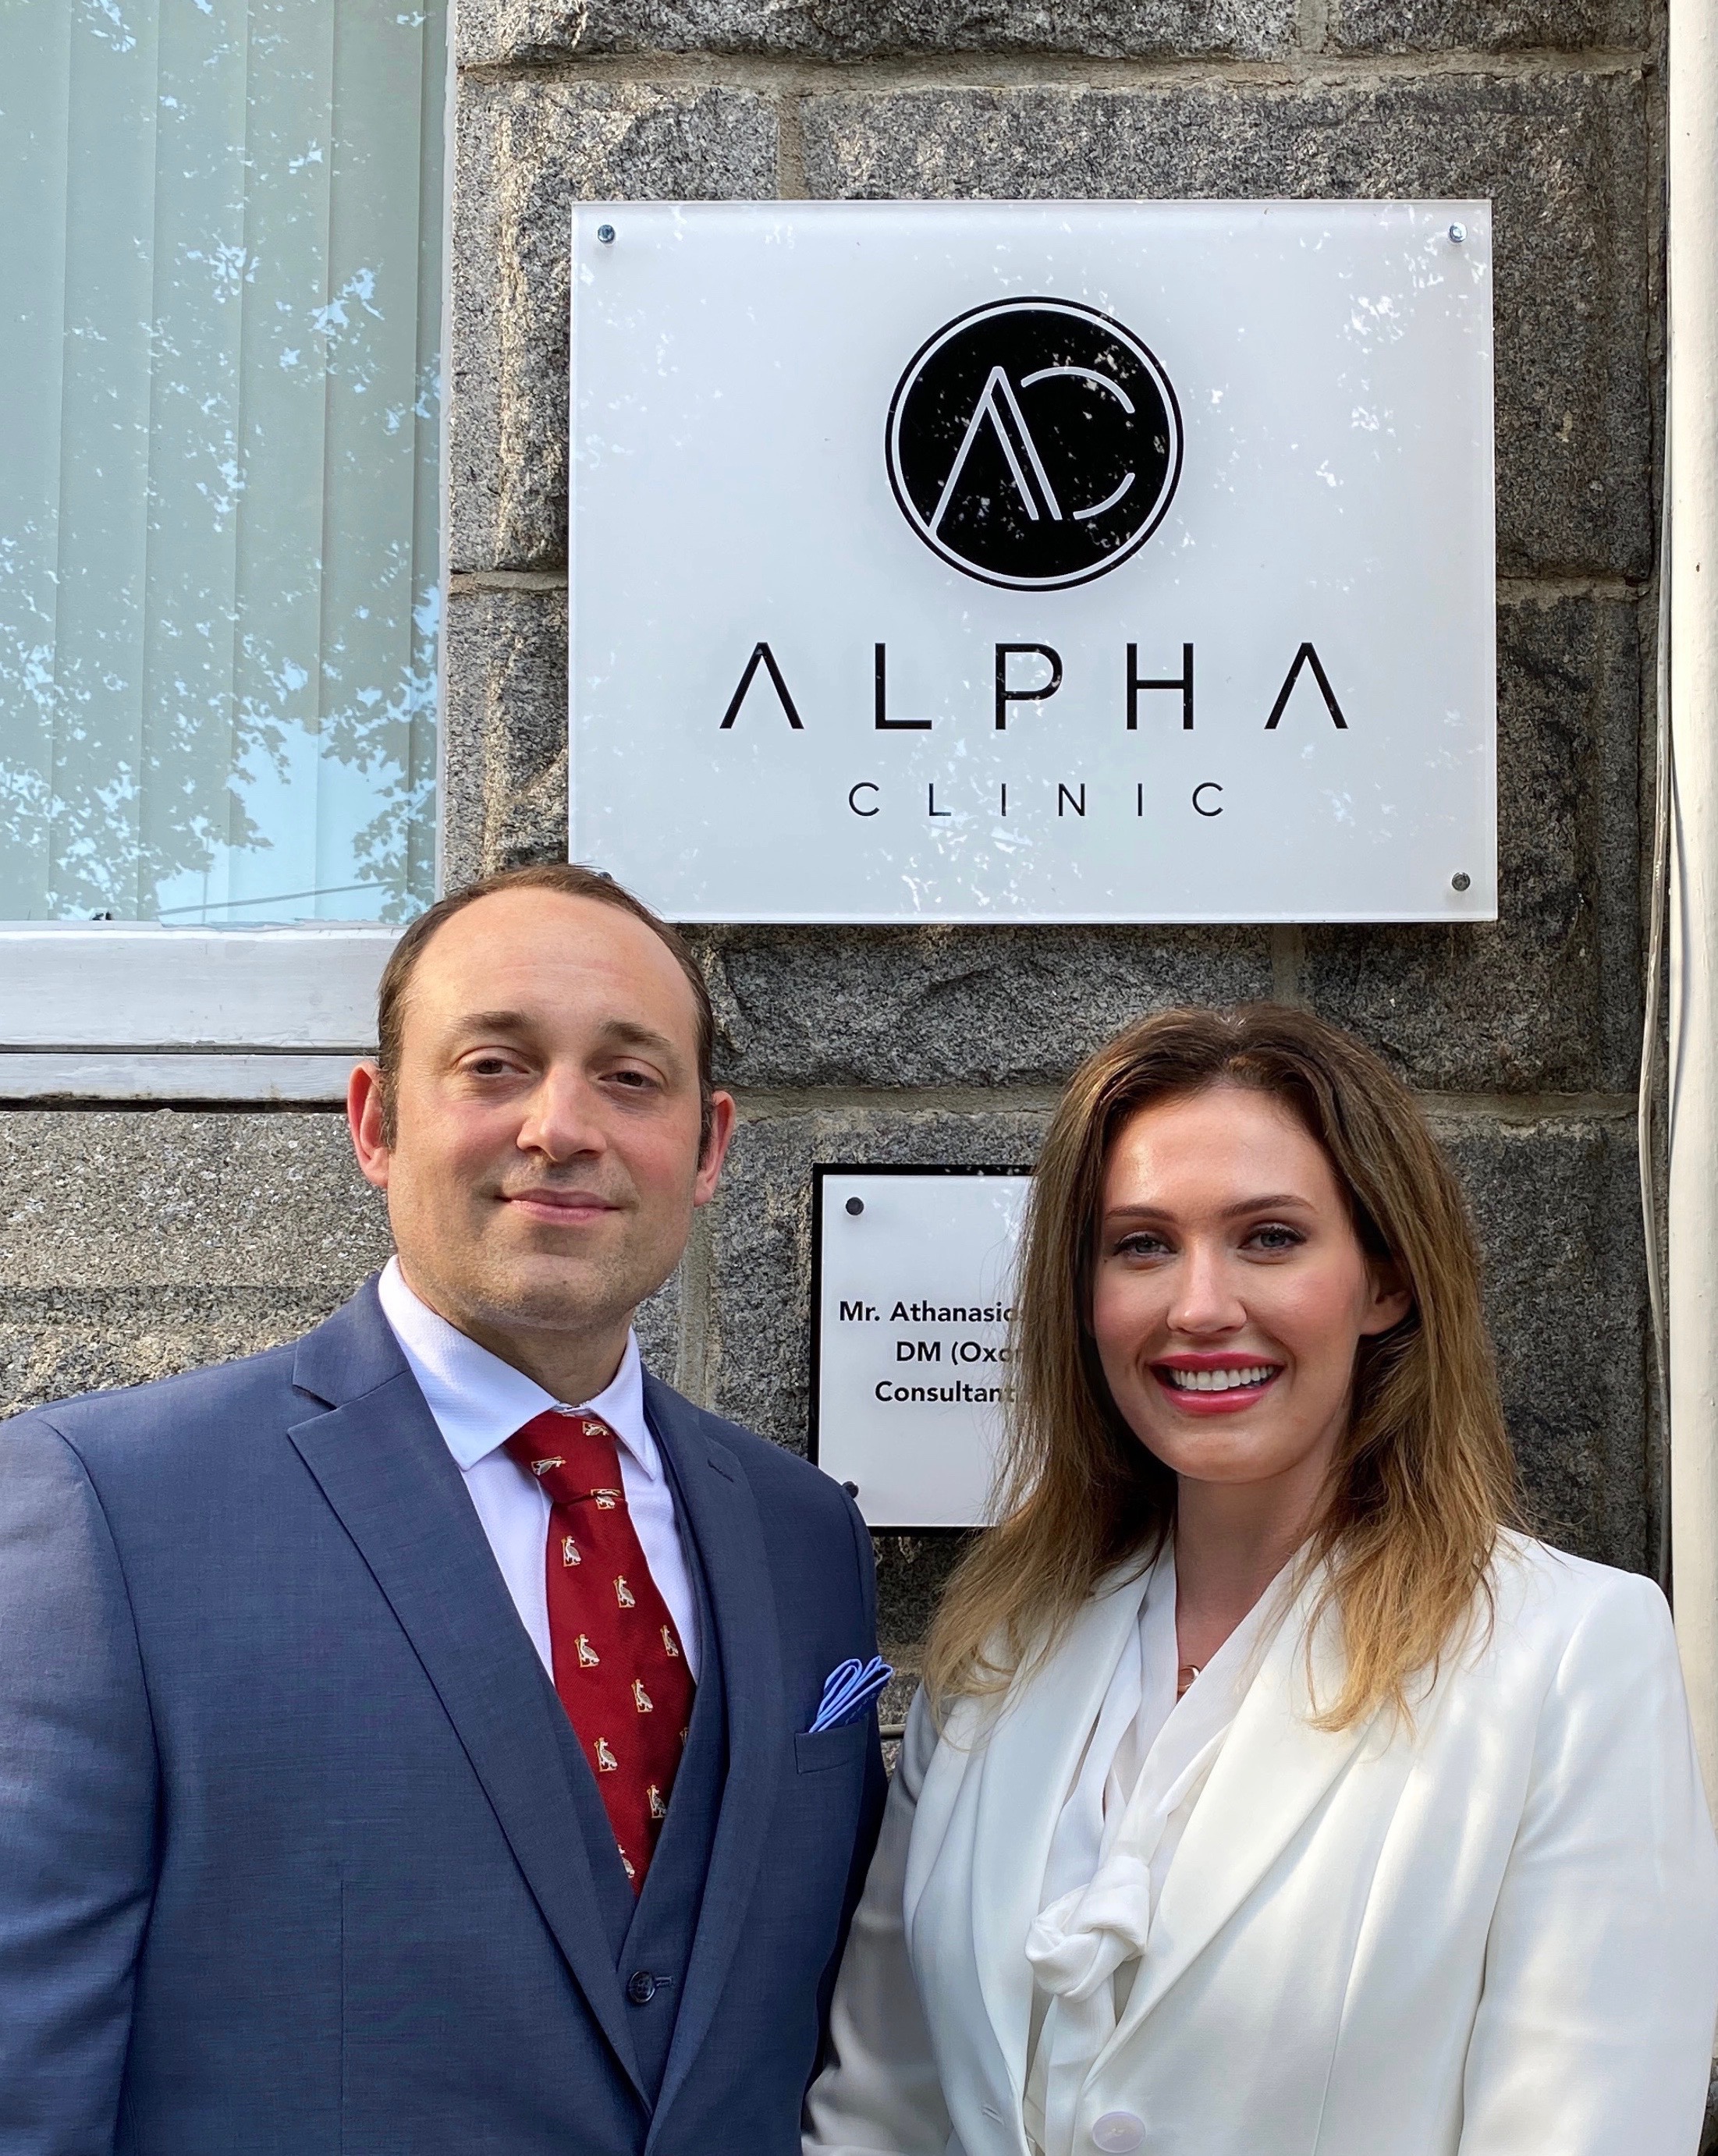 Alpha Clinic expands with Aberdeen aesthetics firm acquisition